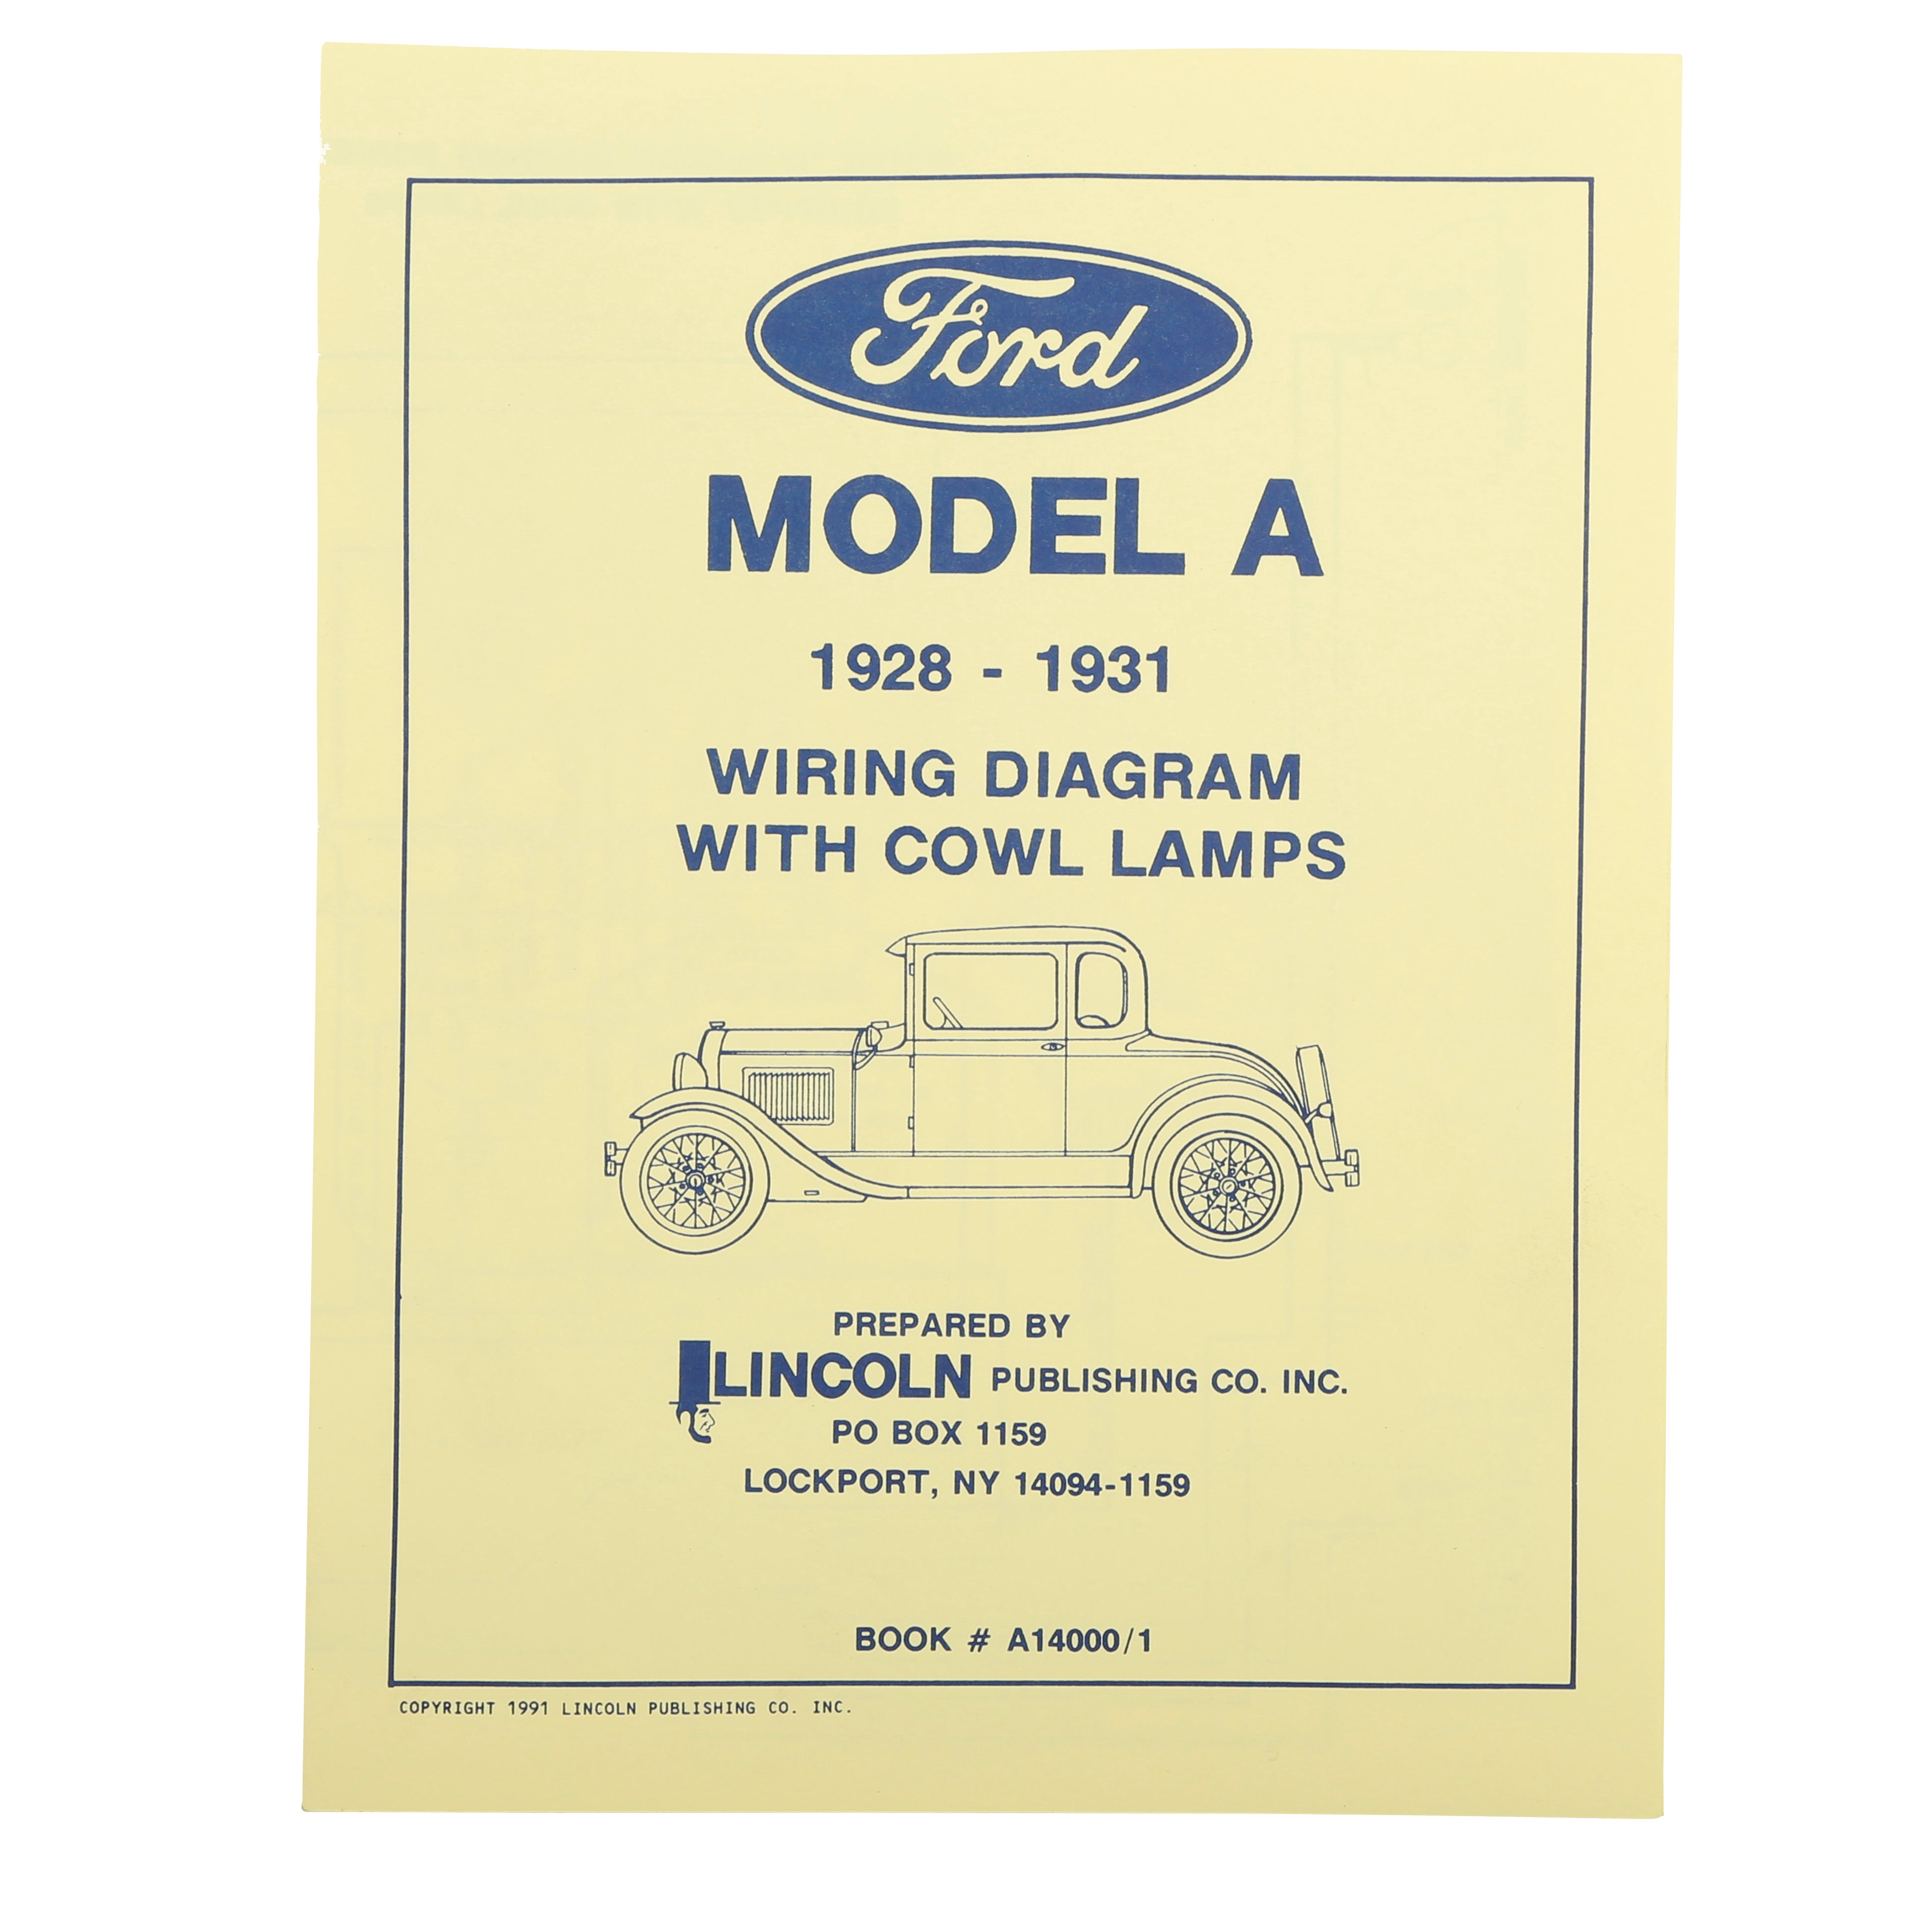 Model A Ford Wiring Diagram with Cowl Lamps